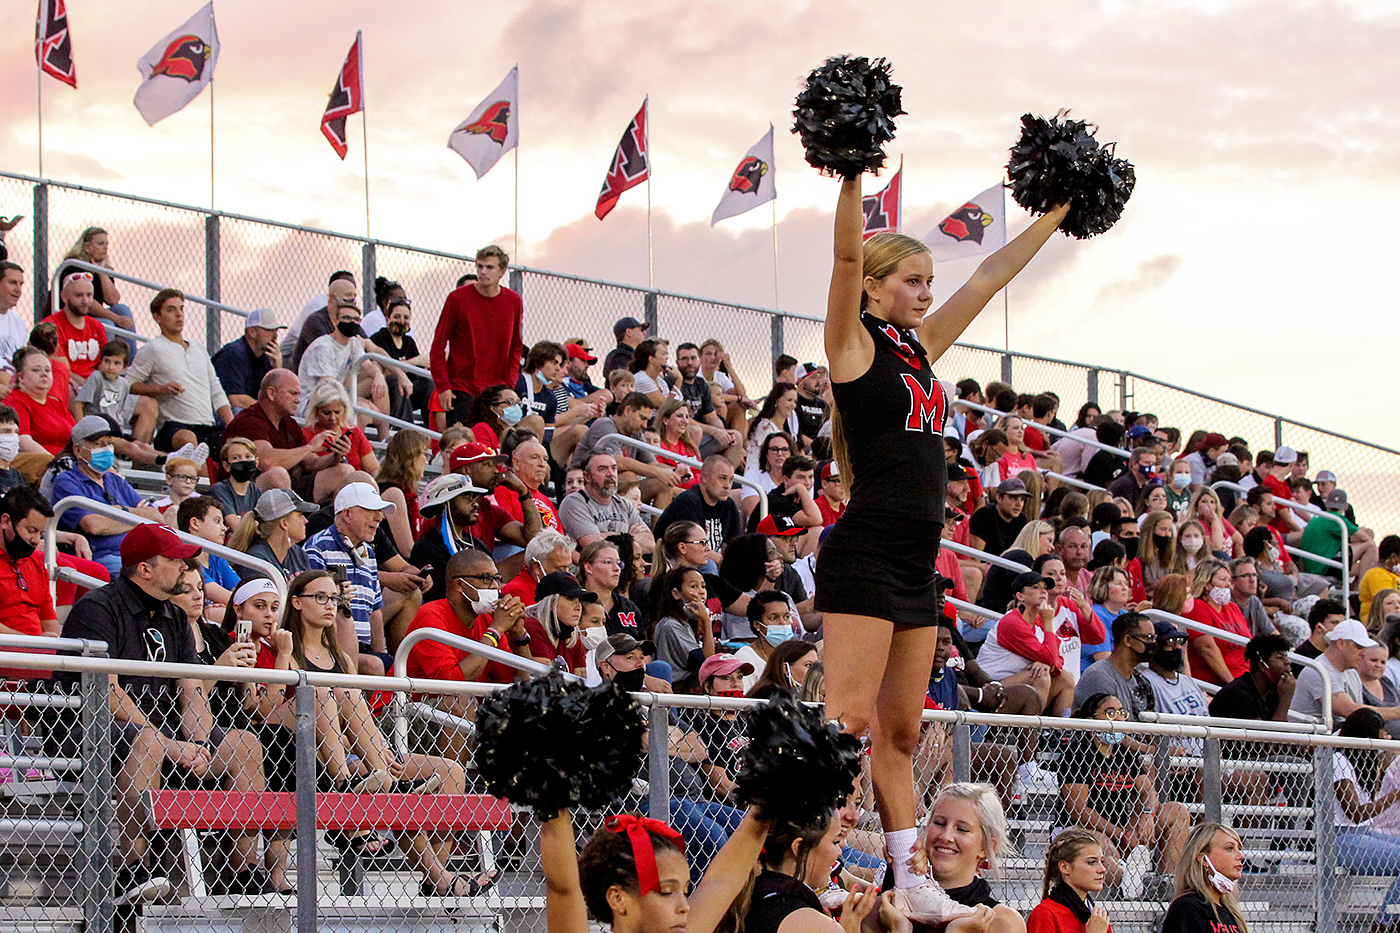 Cheerleaders at home football game with crowd in stands